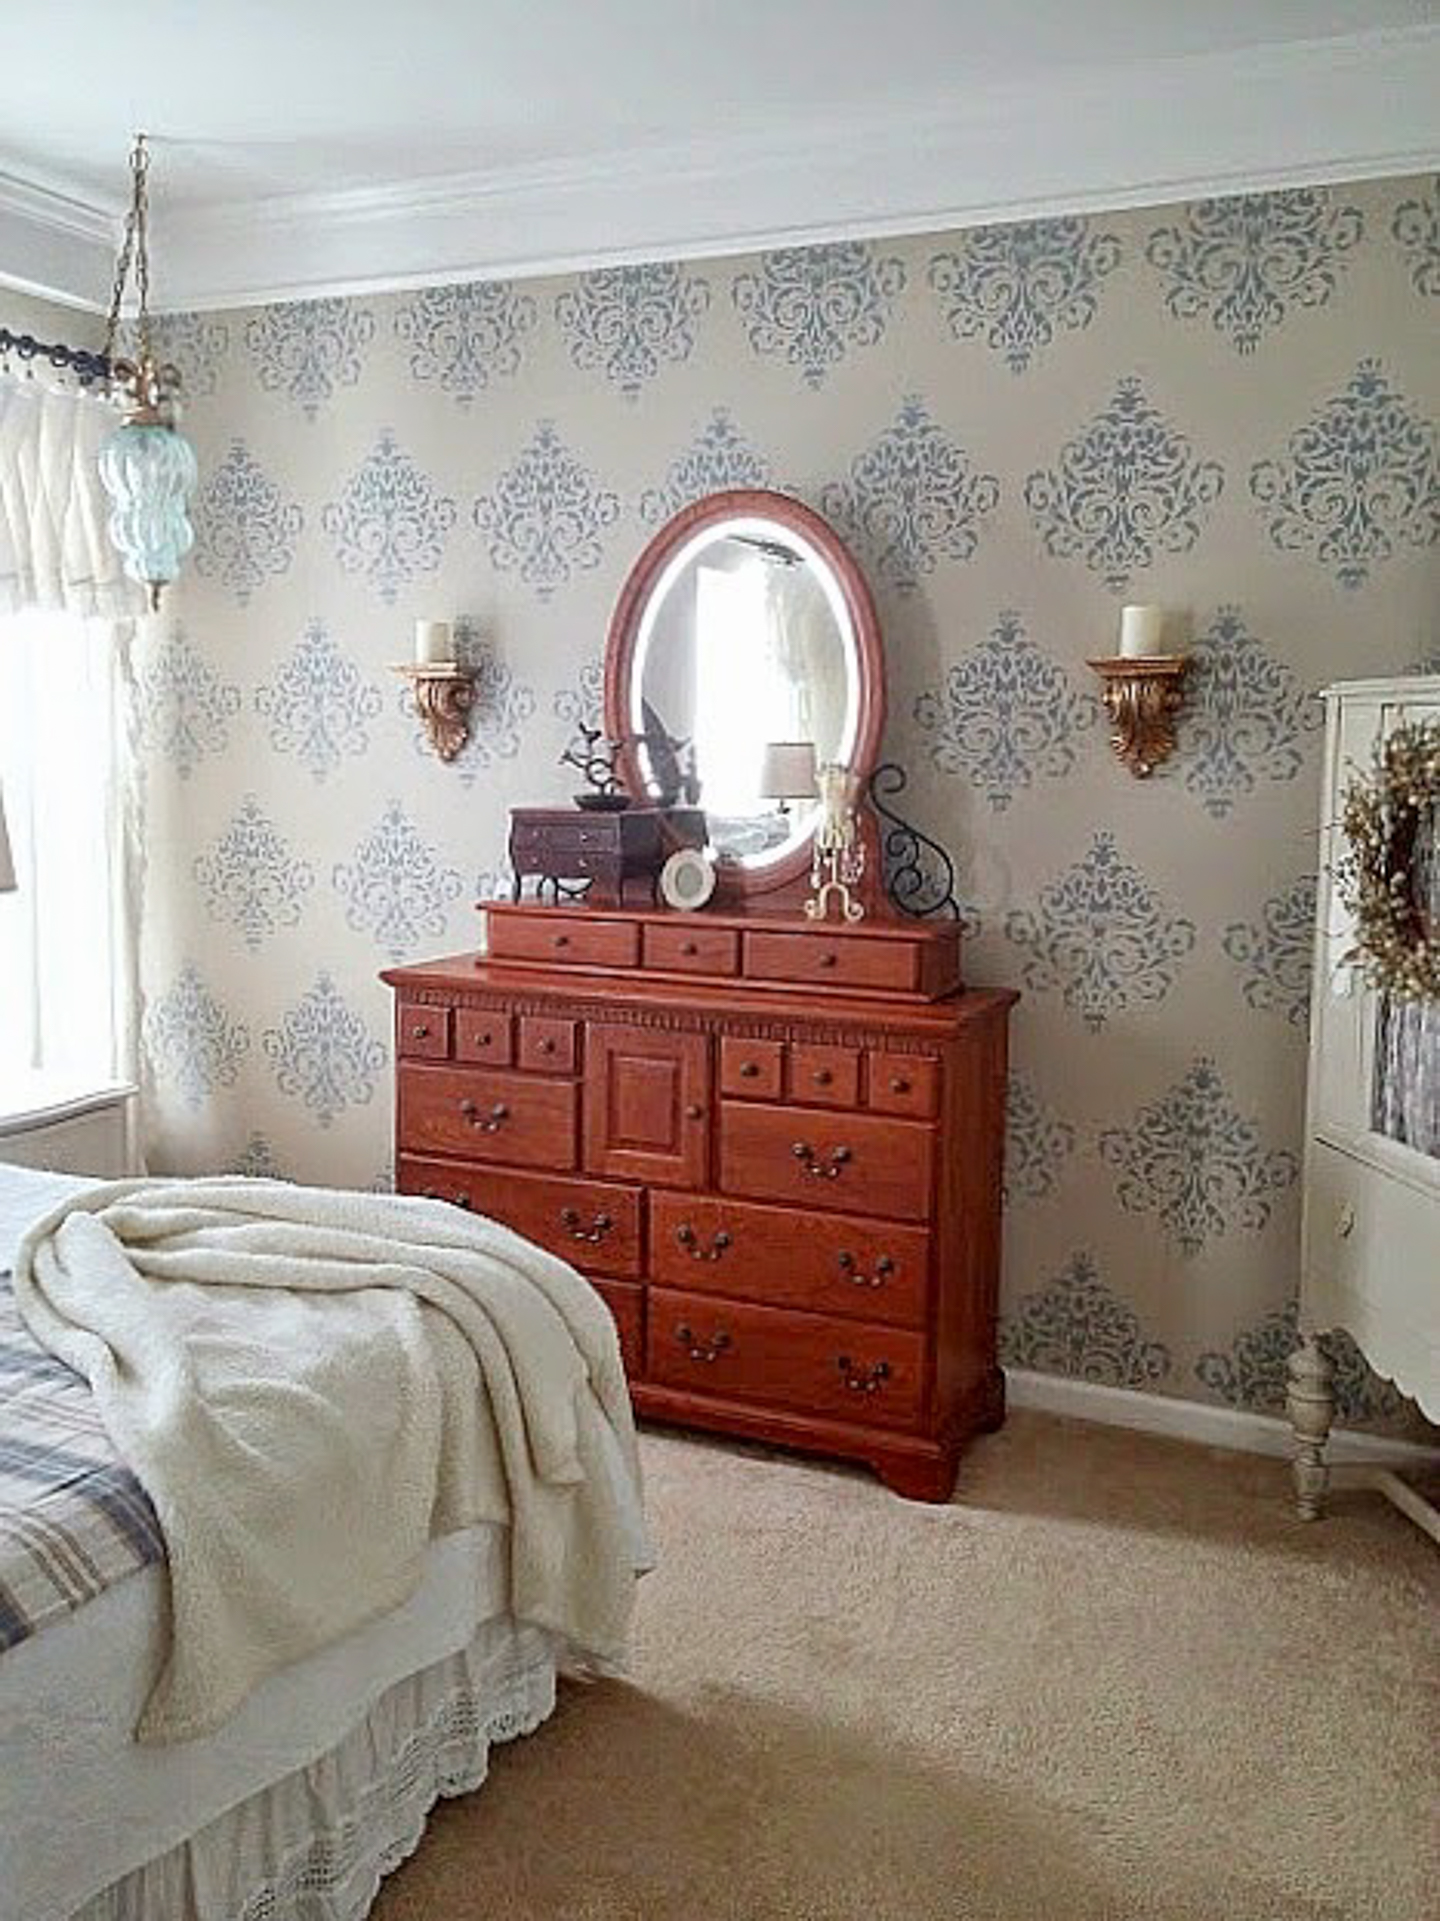 Bedroom wall painted with a damask stencil via diybeautify.com